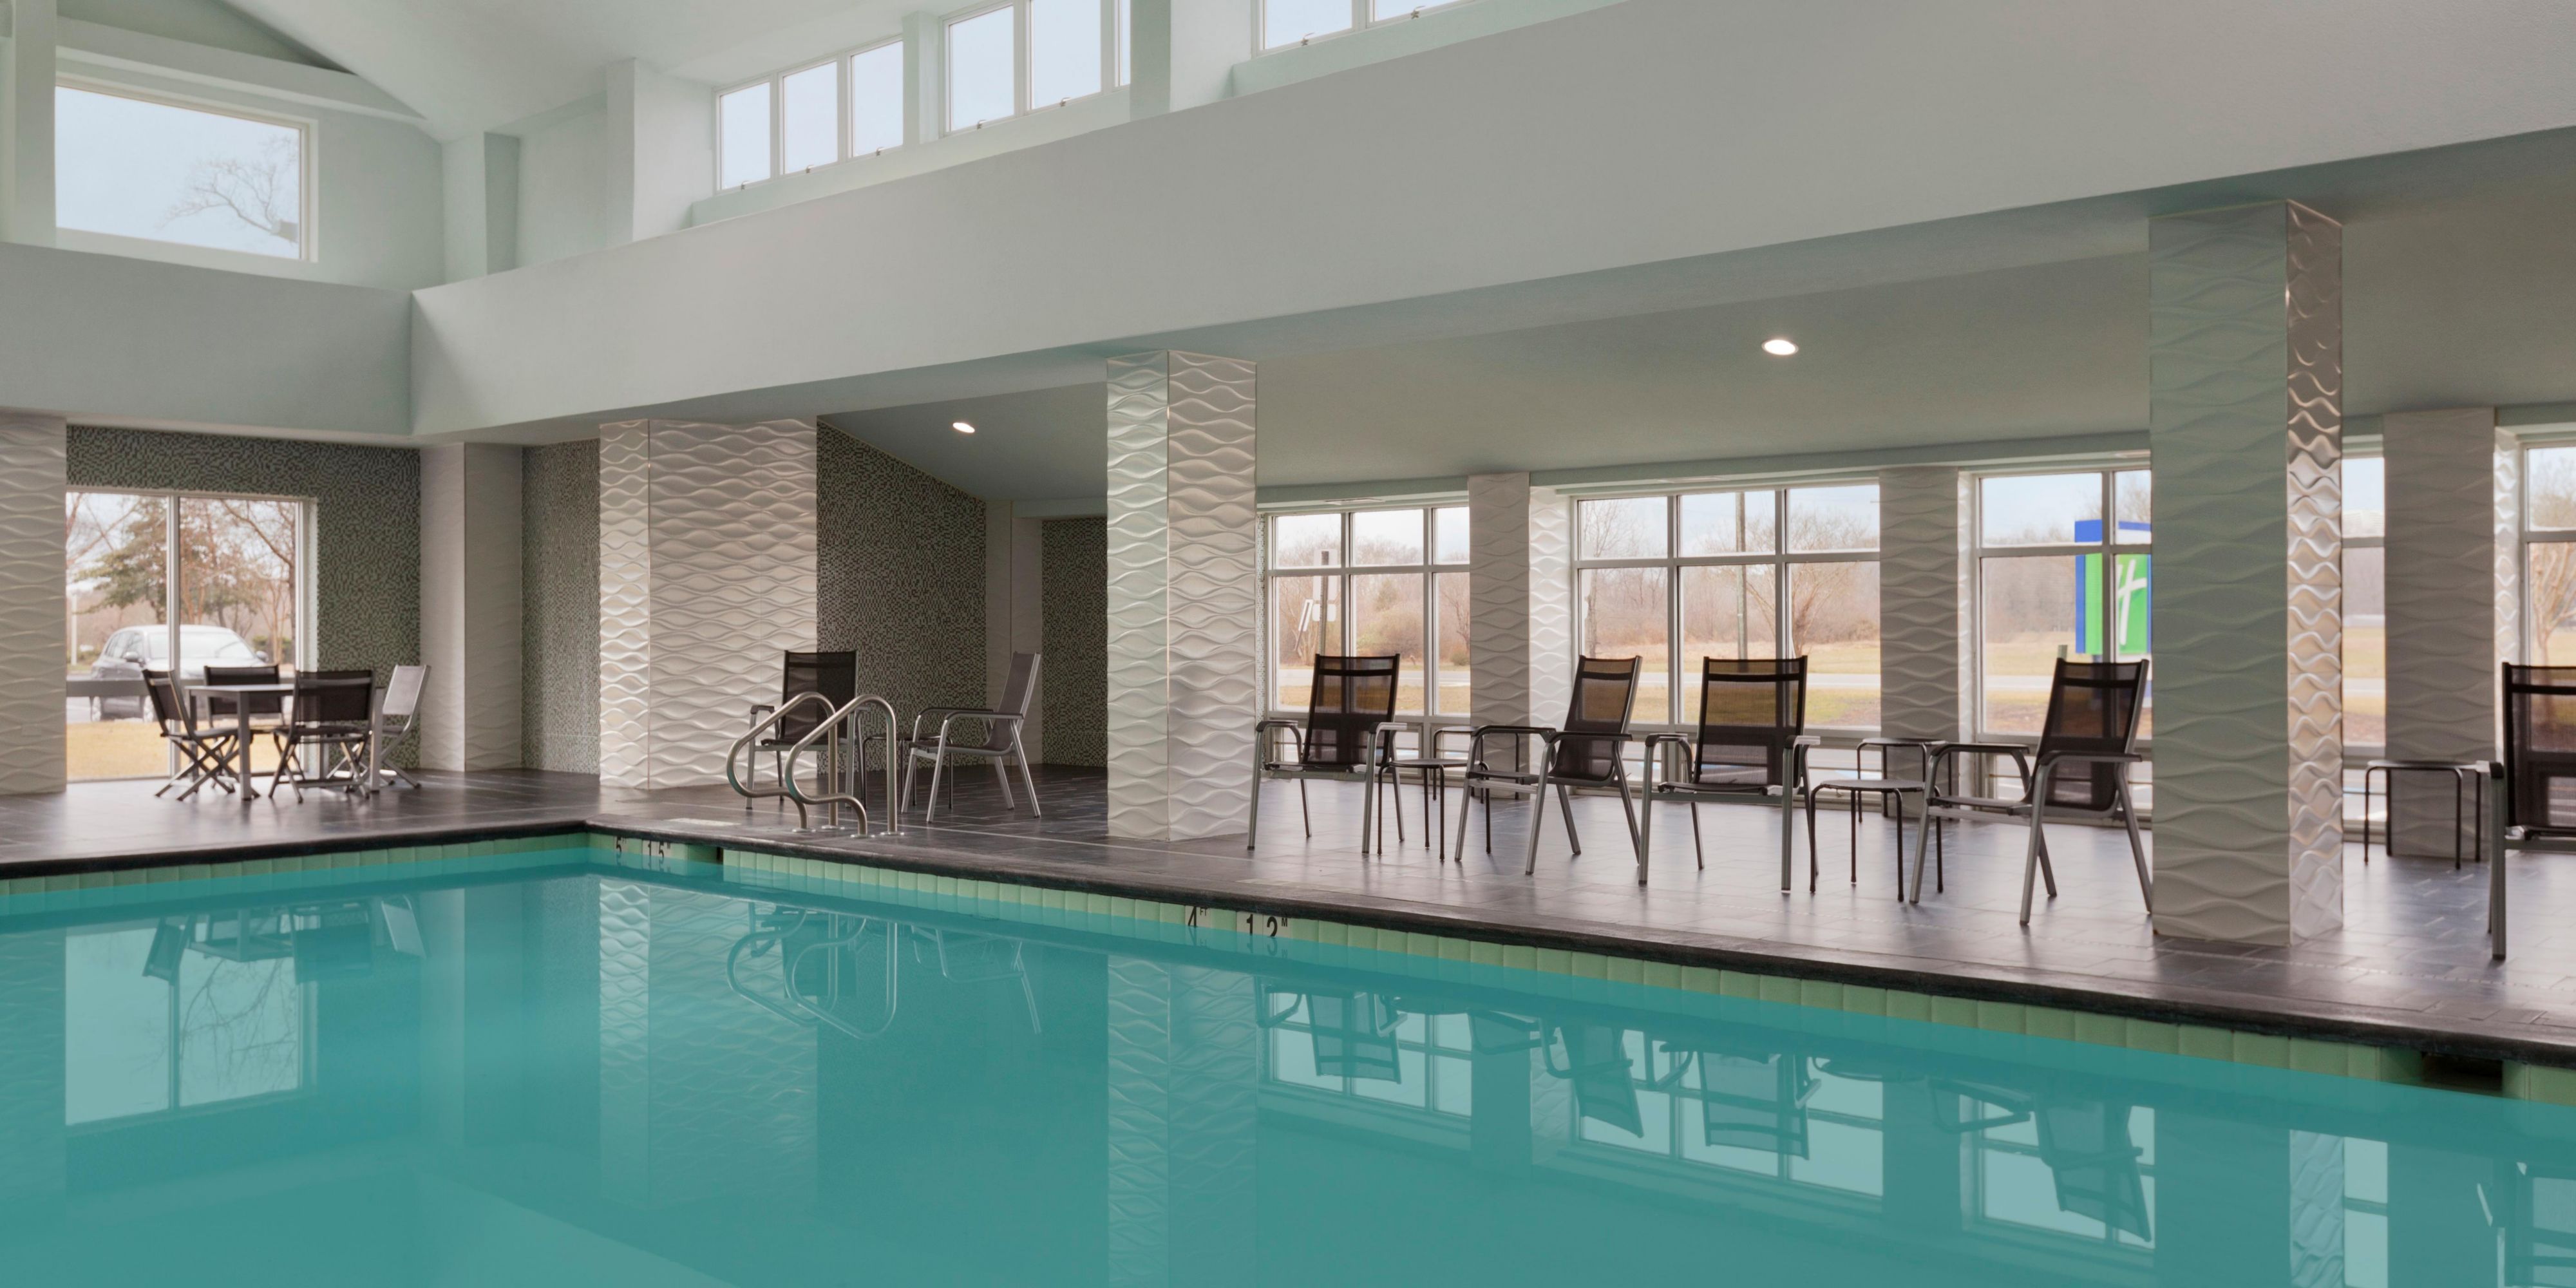 Dive in, to our Heated Indoor Pool with Color Changing LED Lighting.  Pool hours are 7am-10pm Daily.